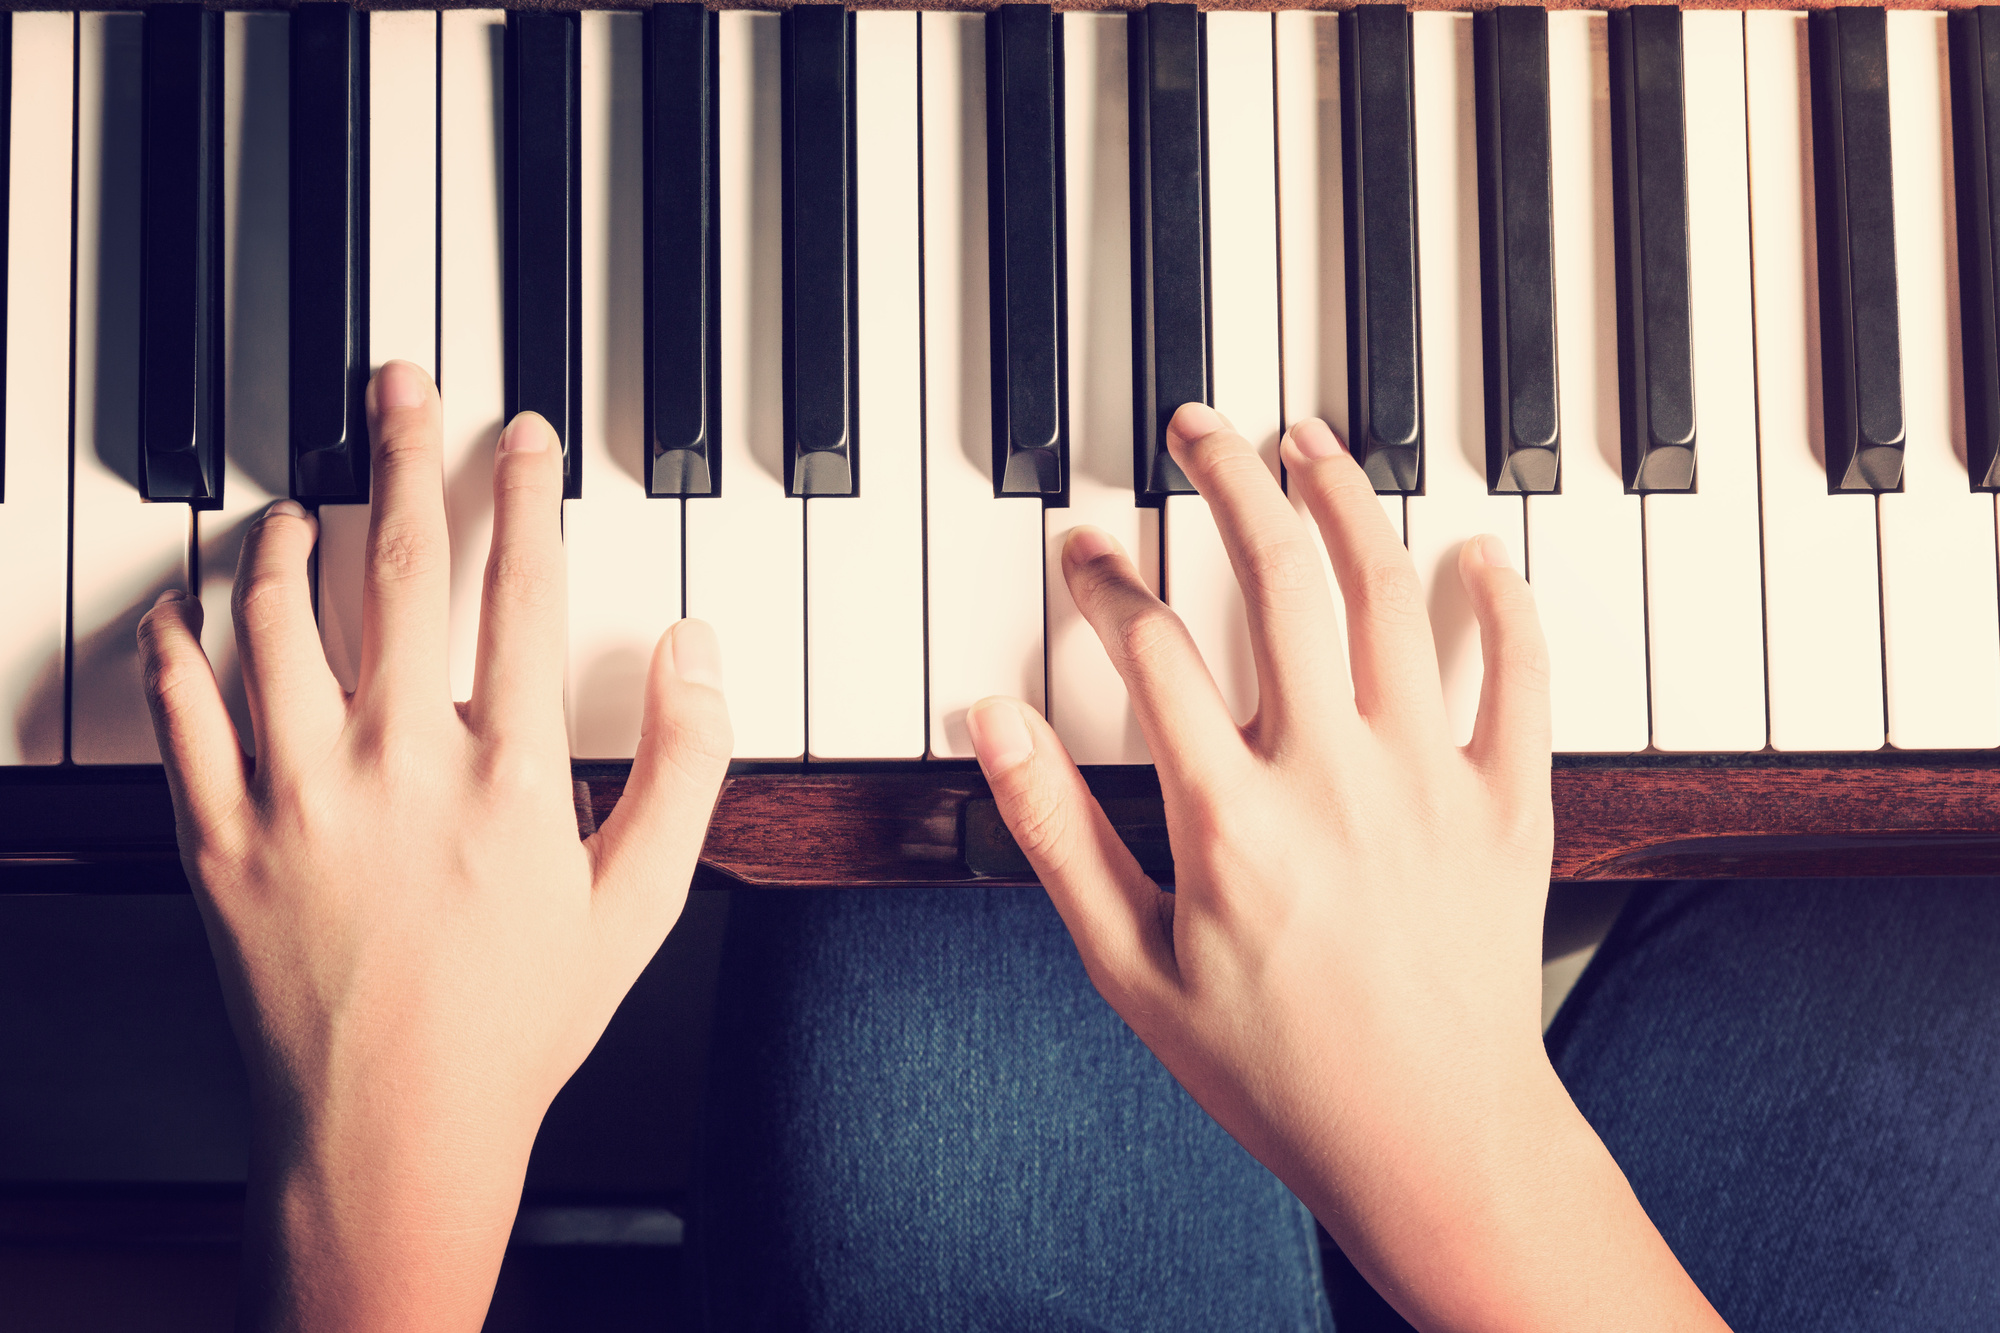 Female hands playing piano with vintage look